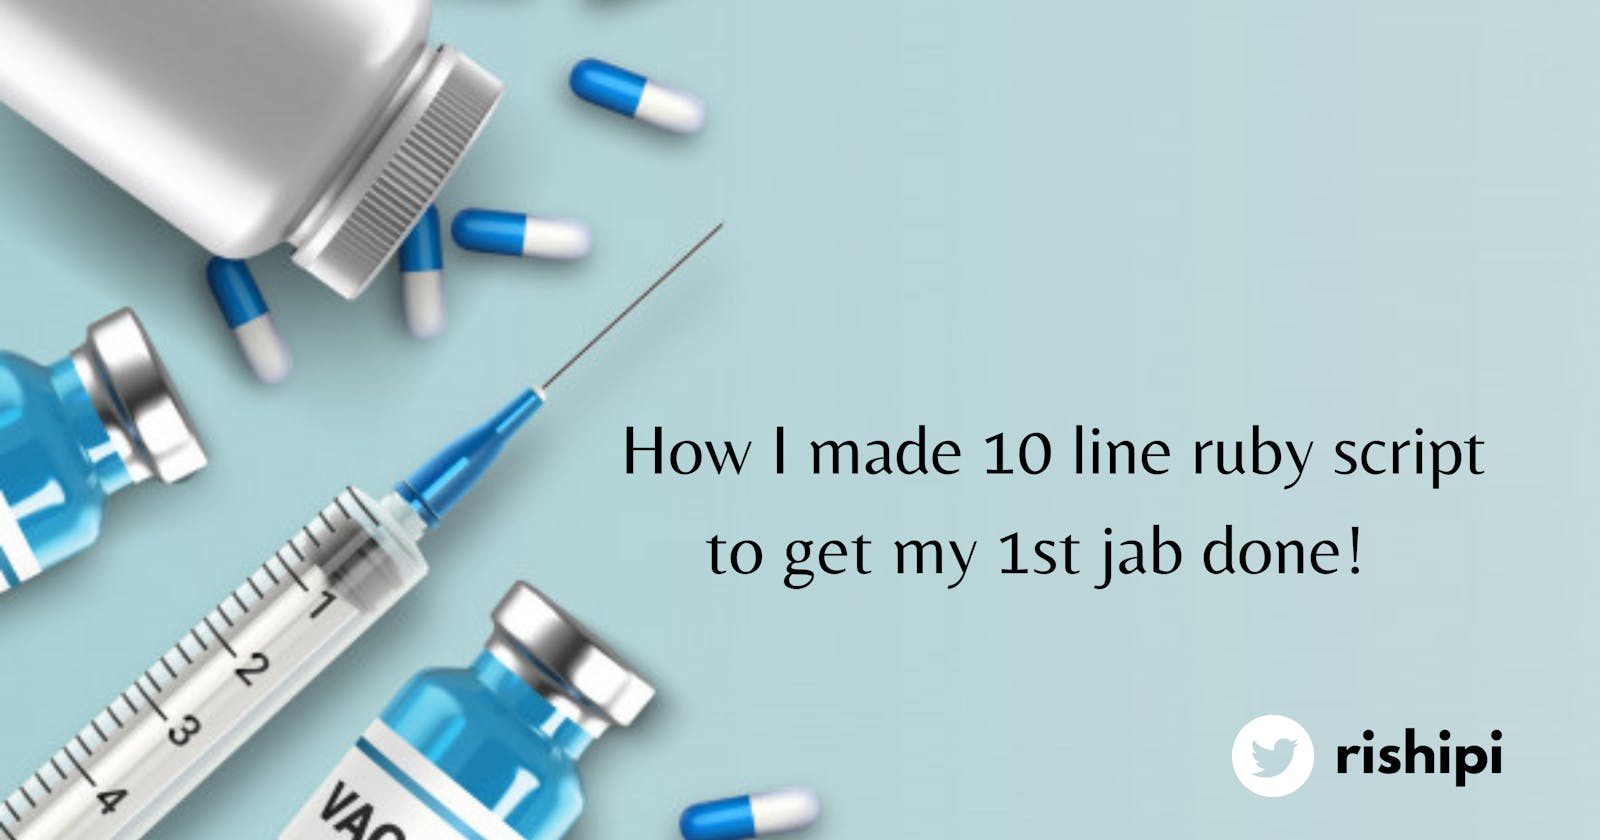 How I made 10 line ruby script to get my 1st jab done! 🤷🏼